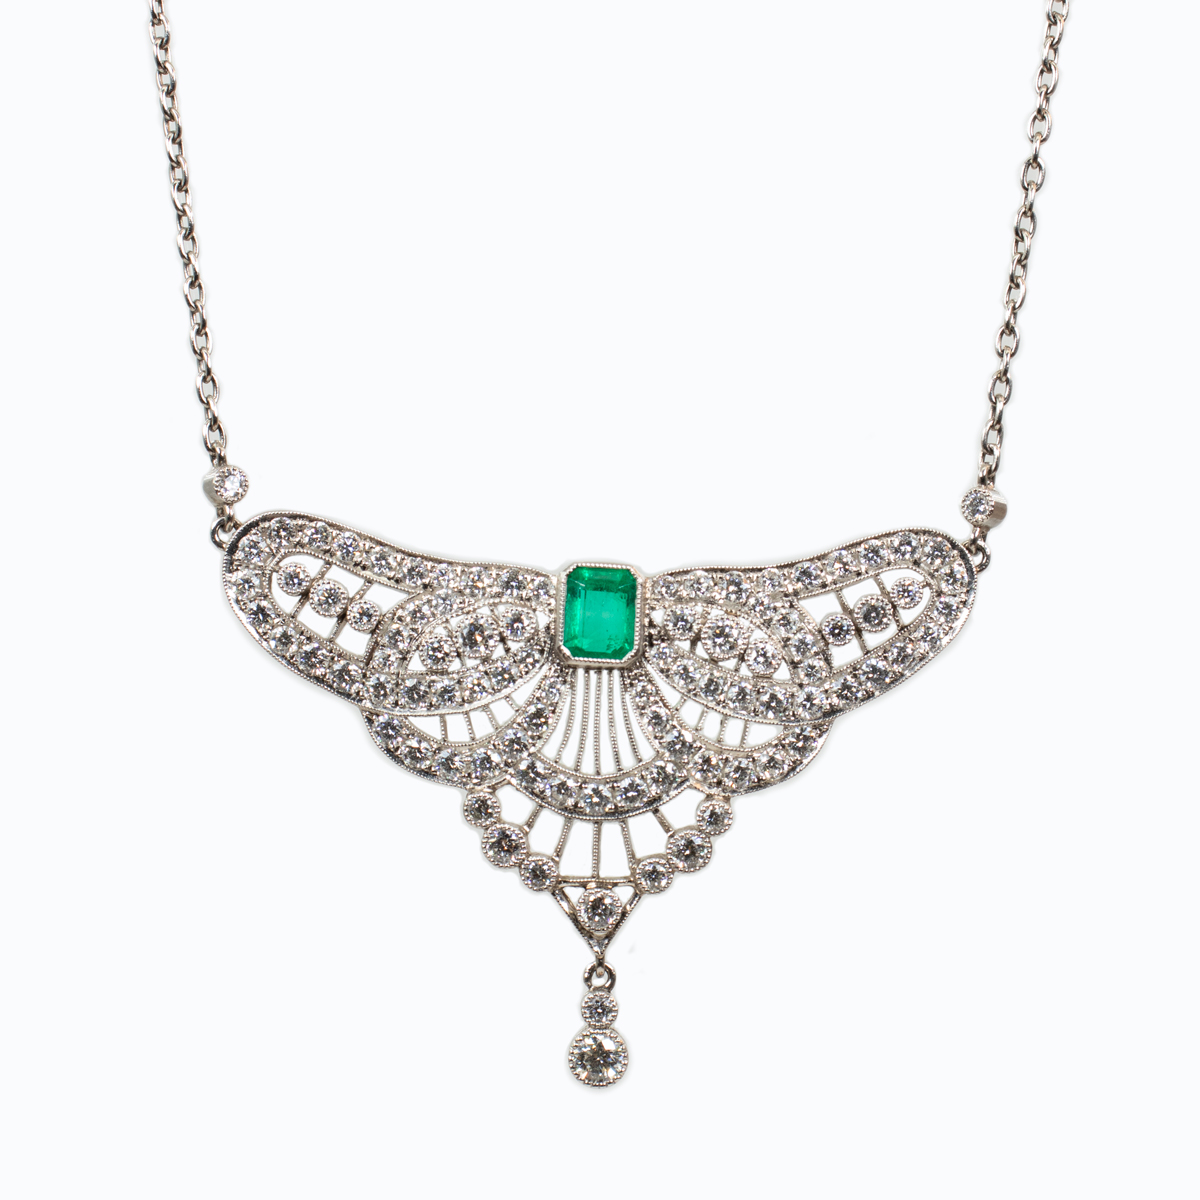 Vintage Natural Diamond Necklace with an Emerald